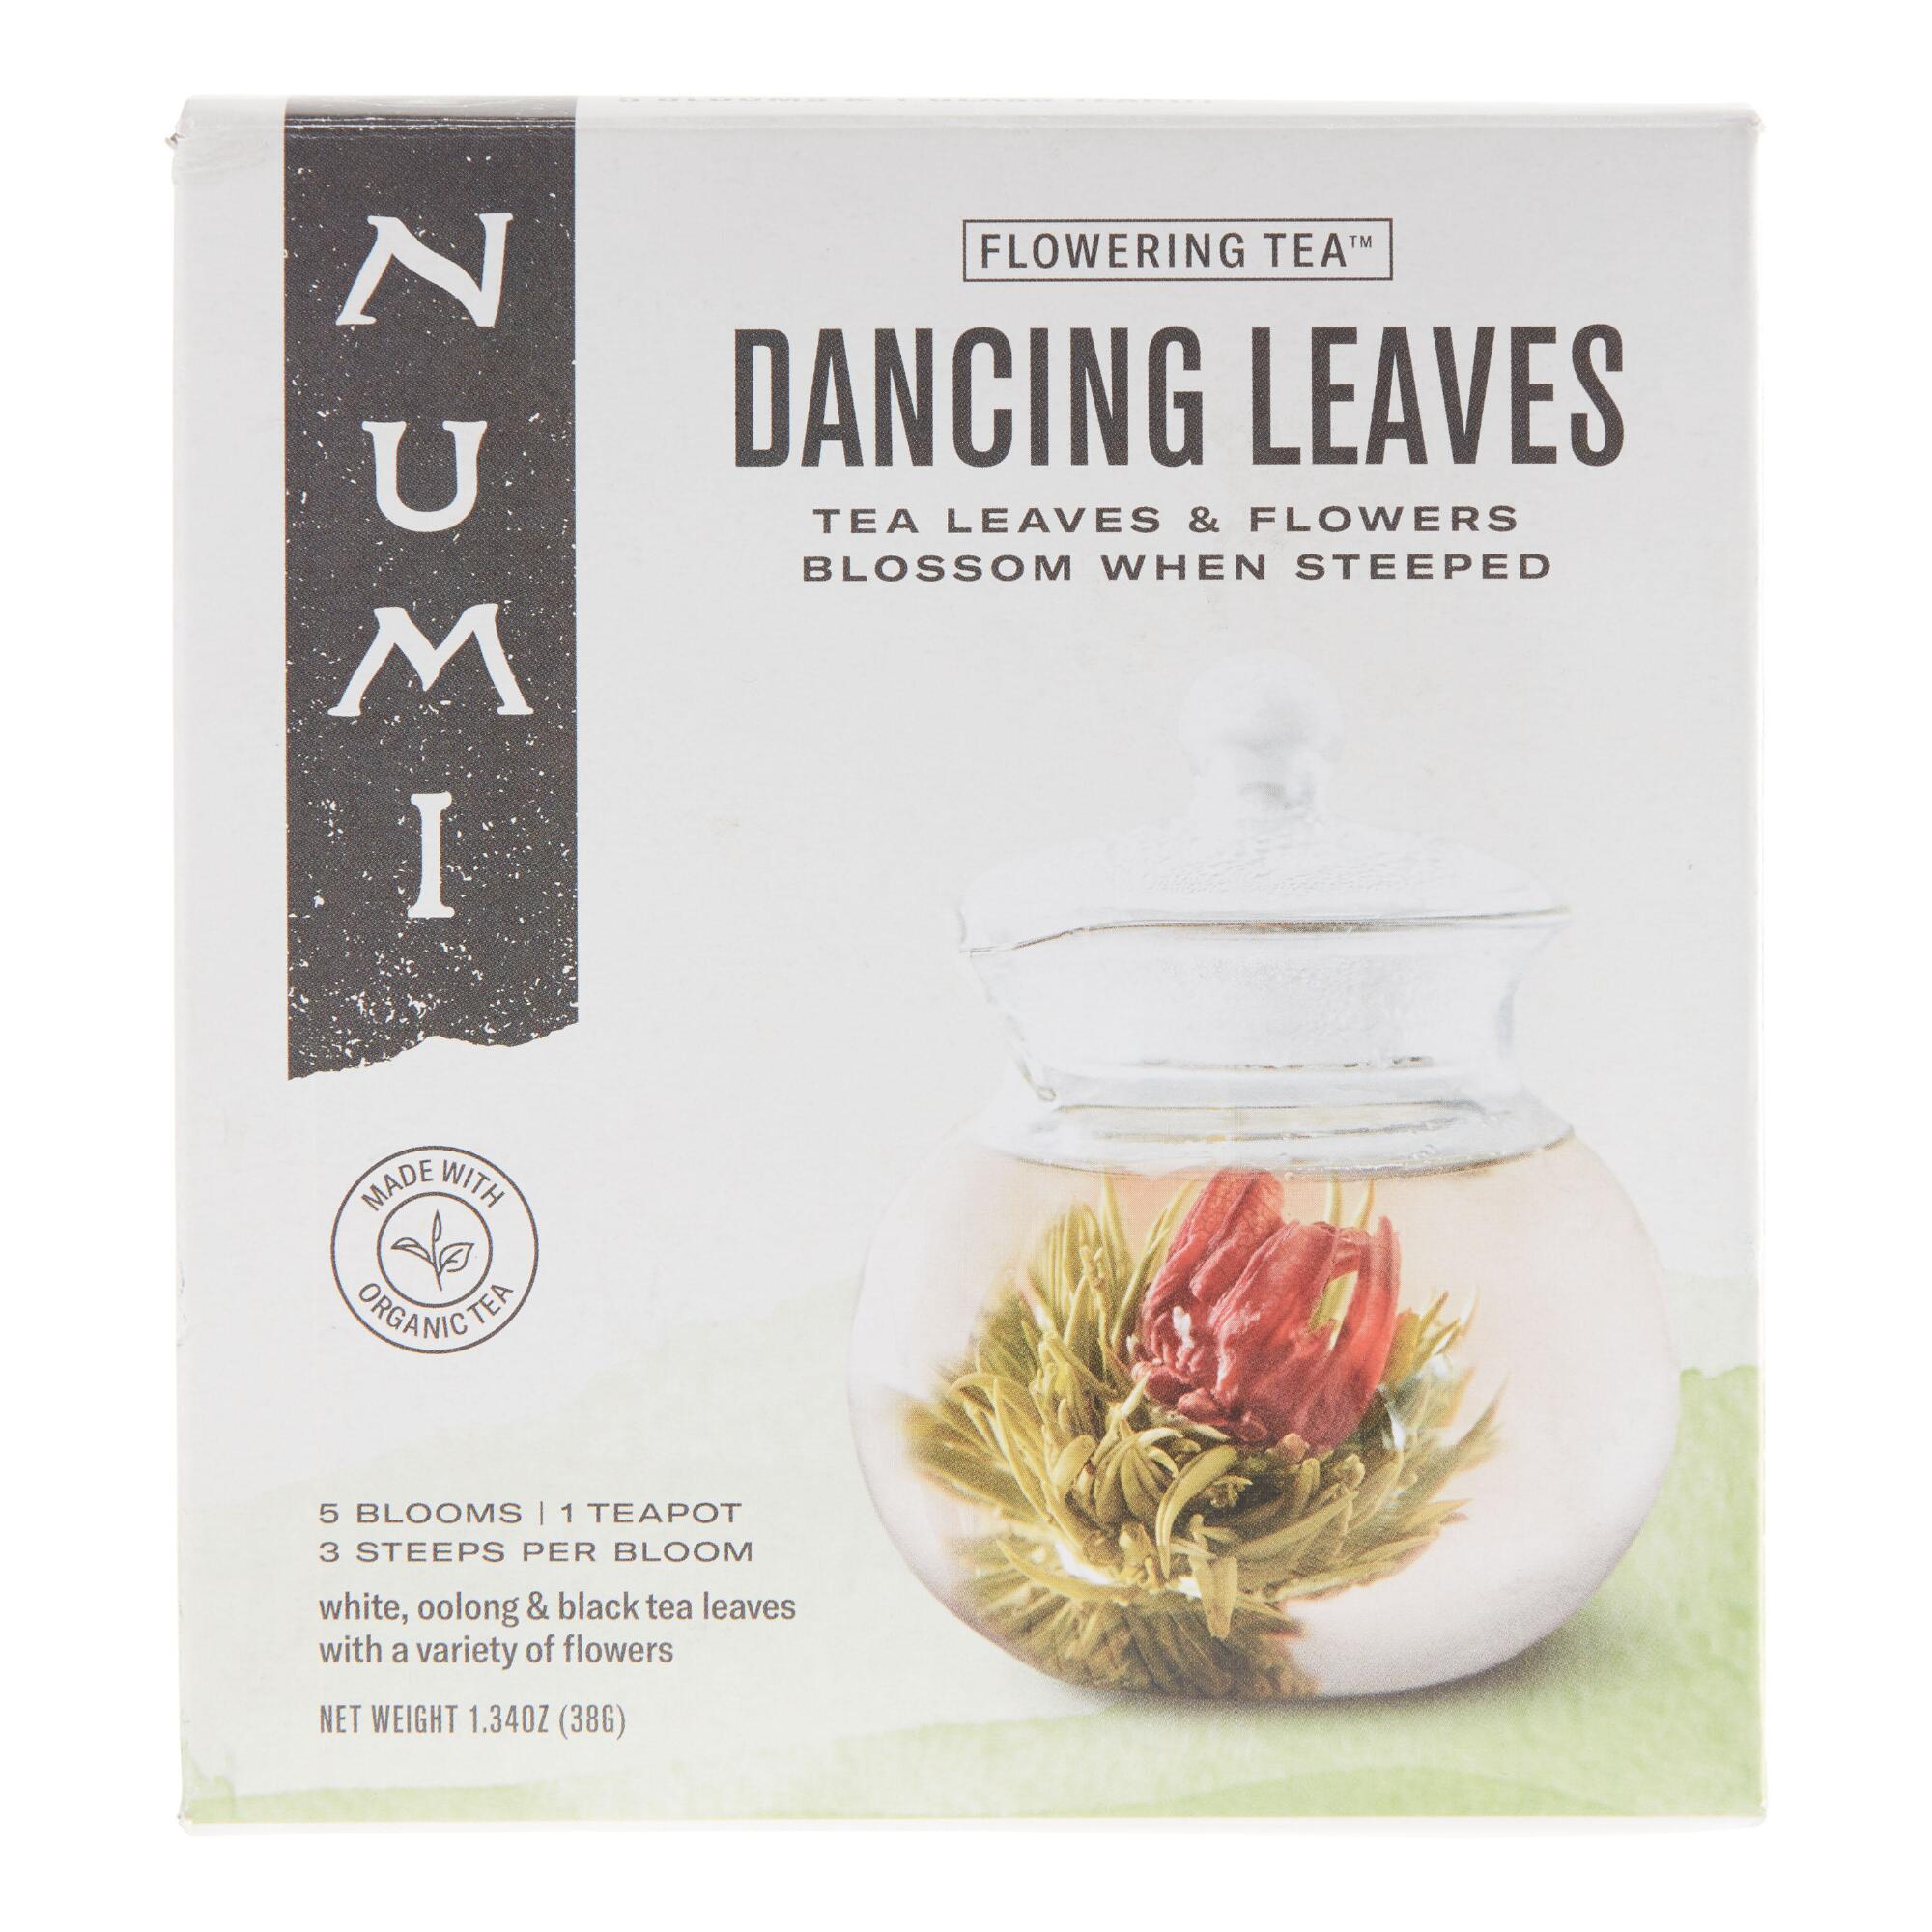 Numi Dancing Leaves Flowering Tea and Glass Teapot Set by World Market